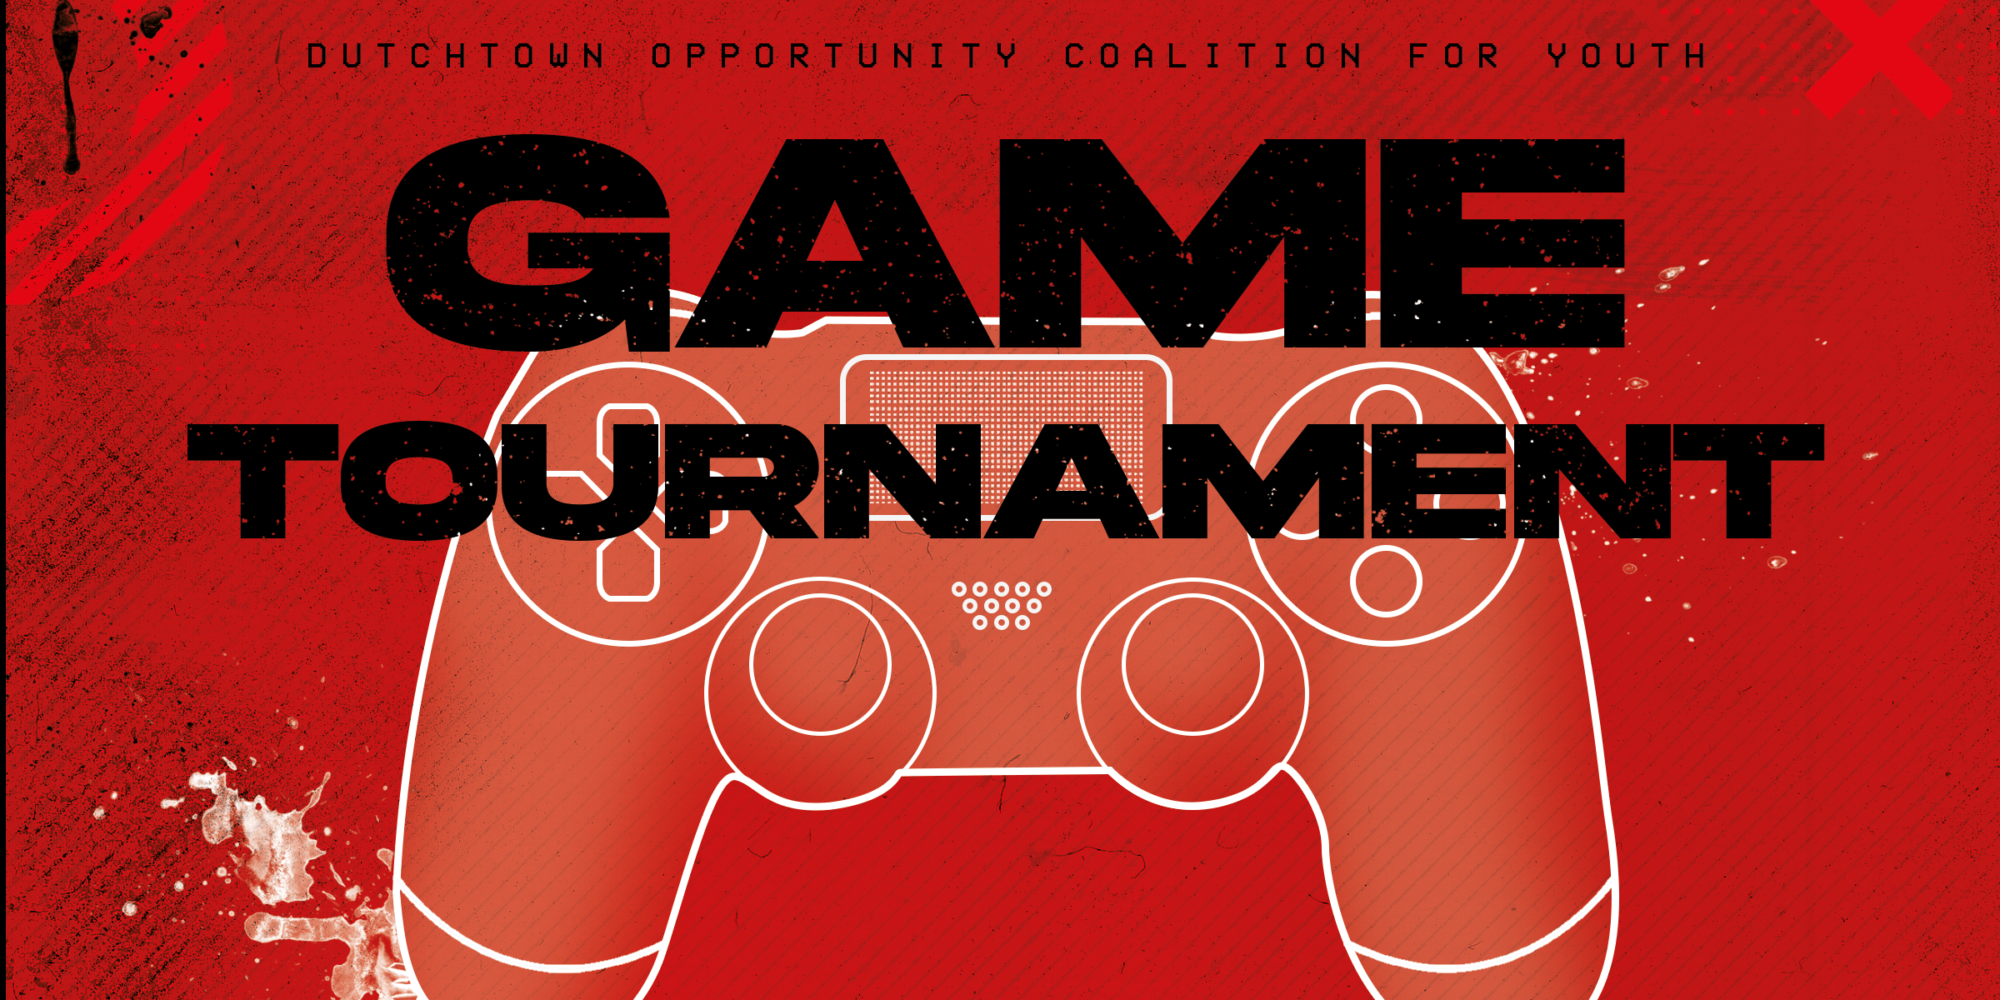 Dutchtown Opportunity Coalition for Youth Game Tournament